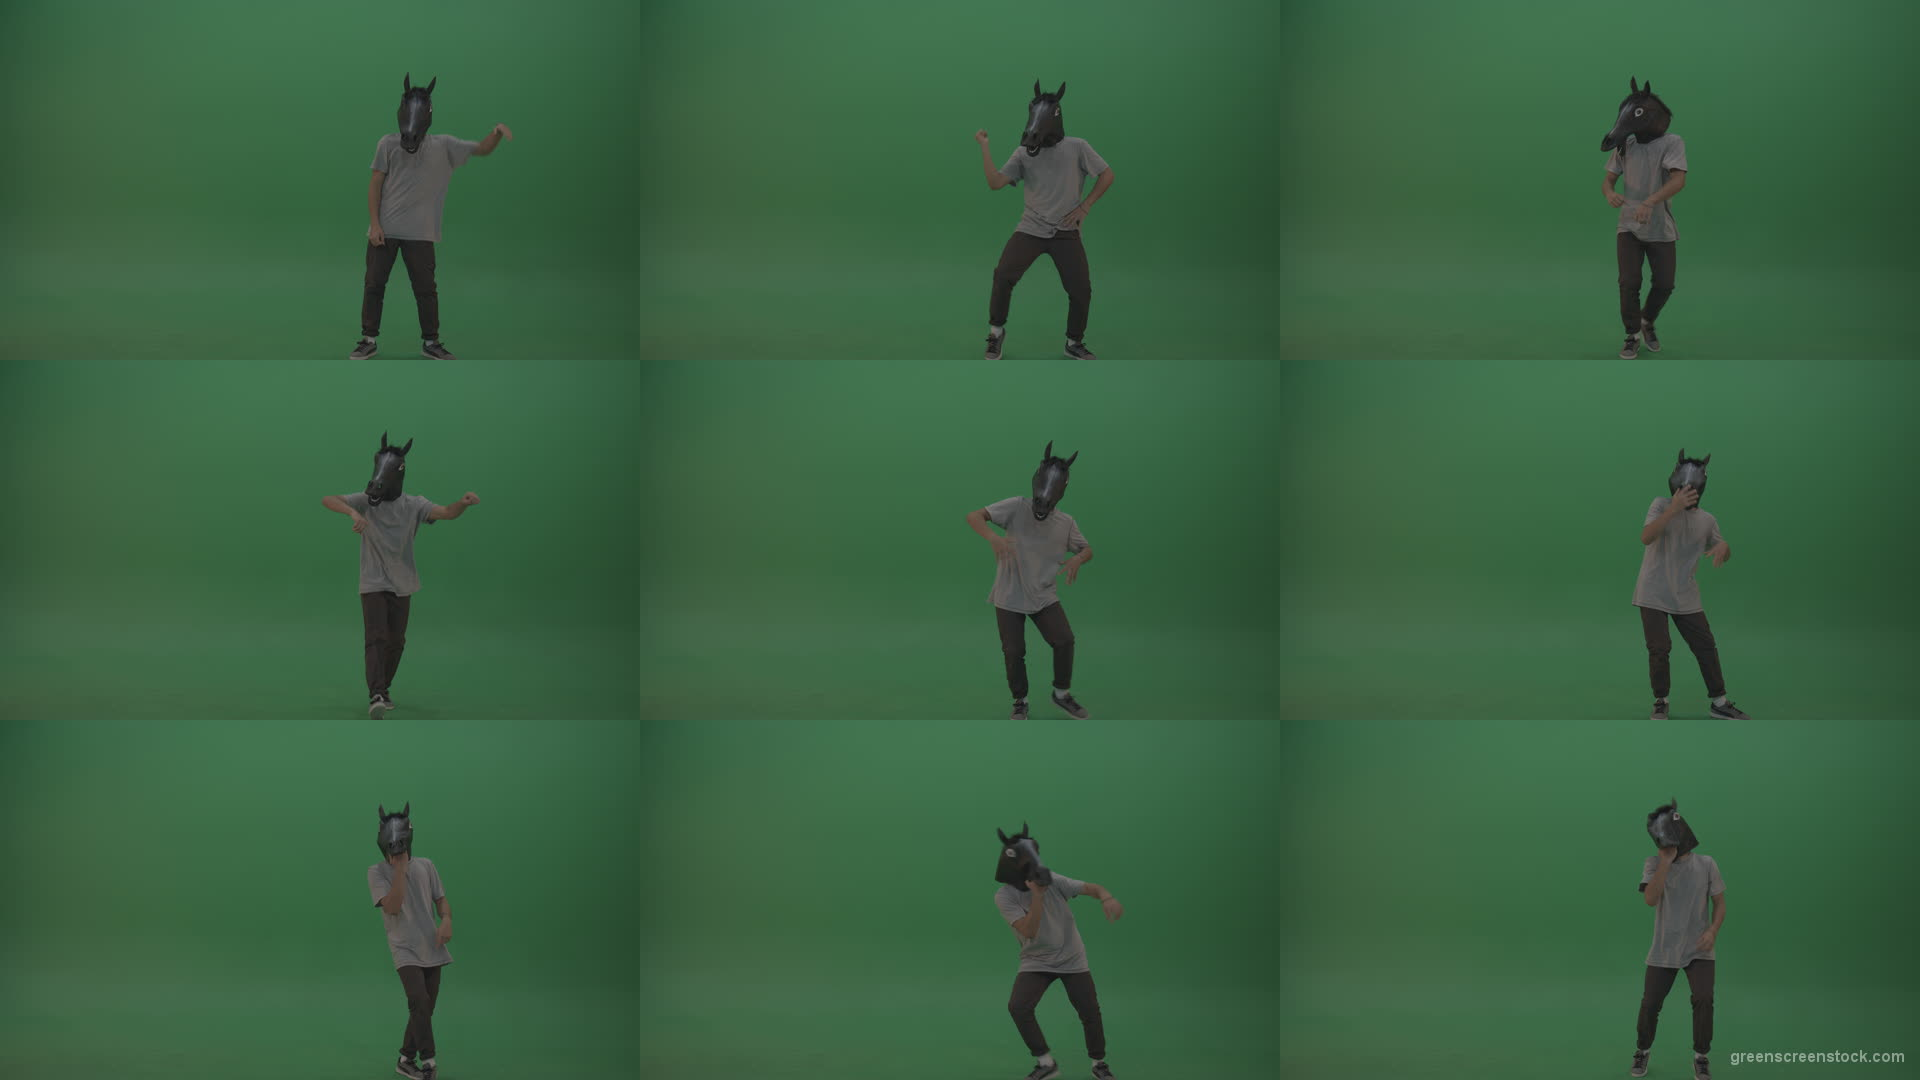 Boy-in-grey-wear-and-horse-head-costume-dances-over-green-screen-background Green Screen Stock